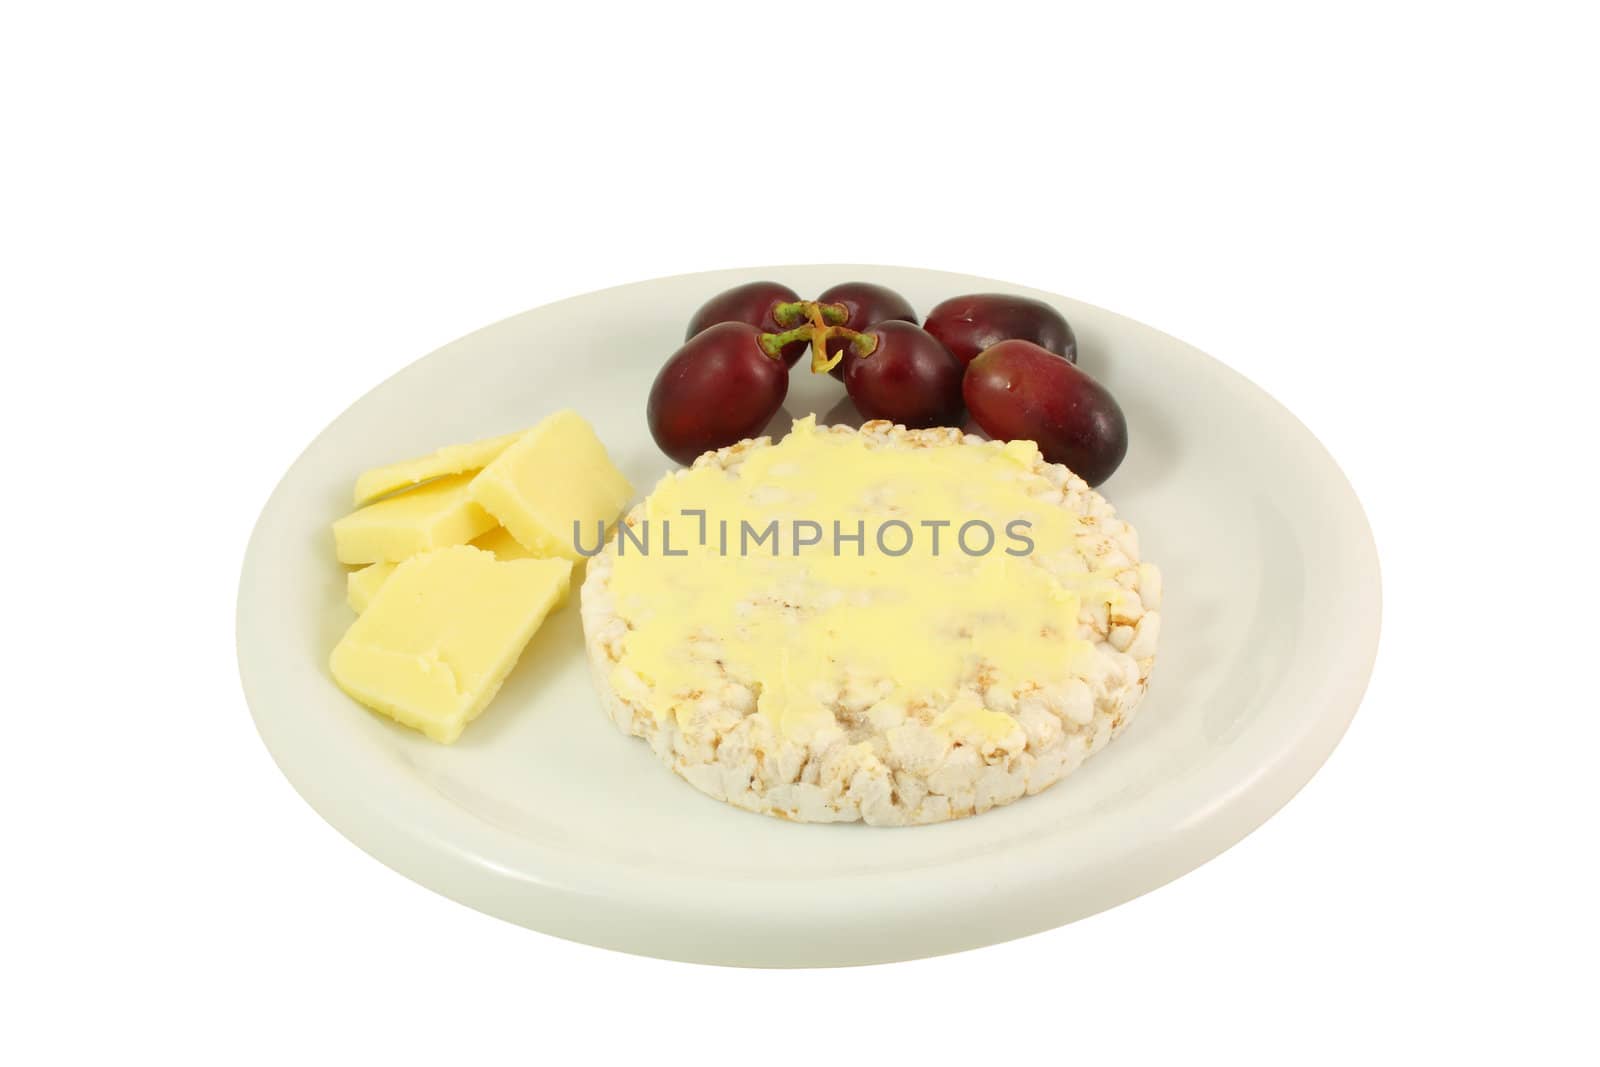 a plate with chesse, grapes and a rice cake on it